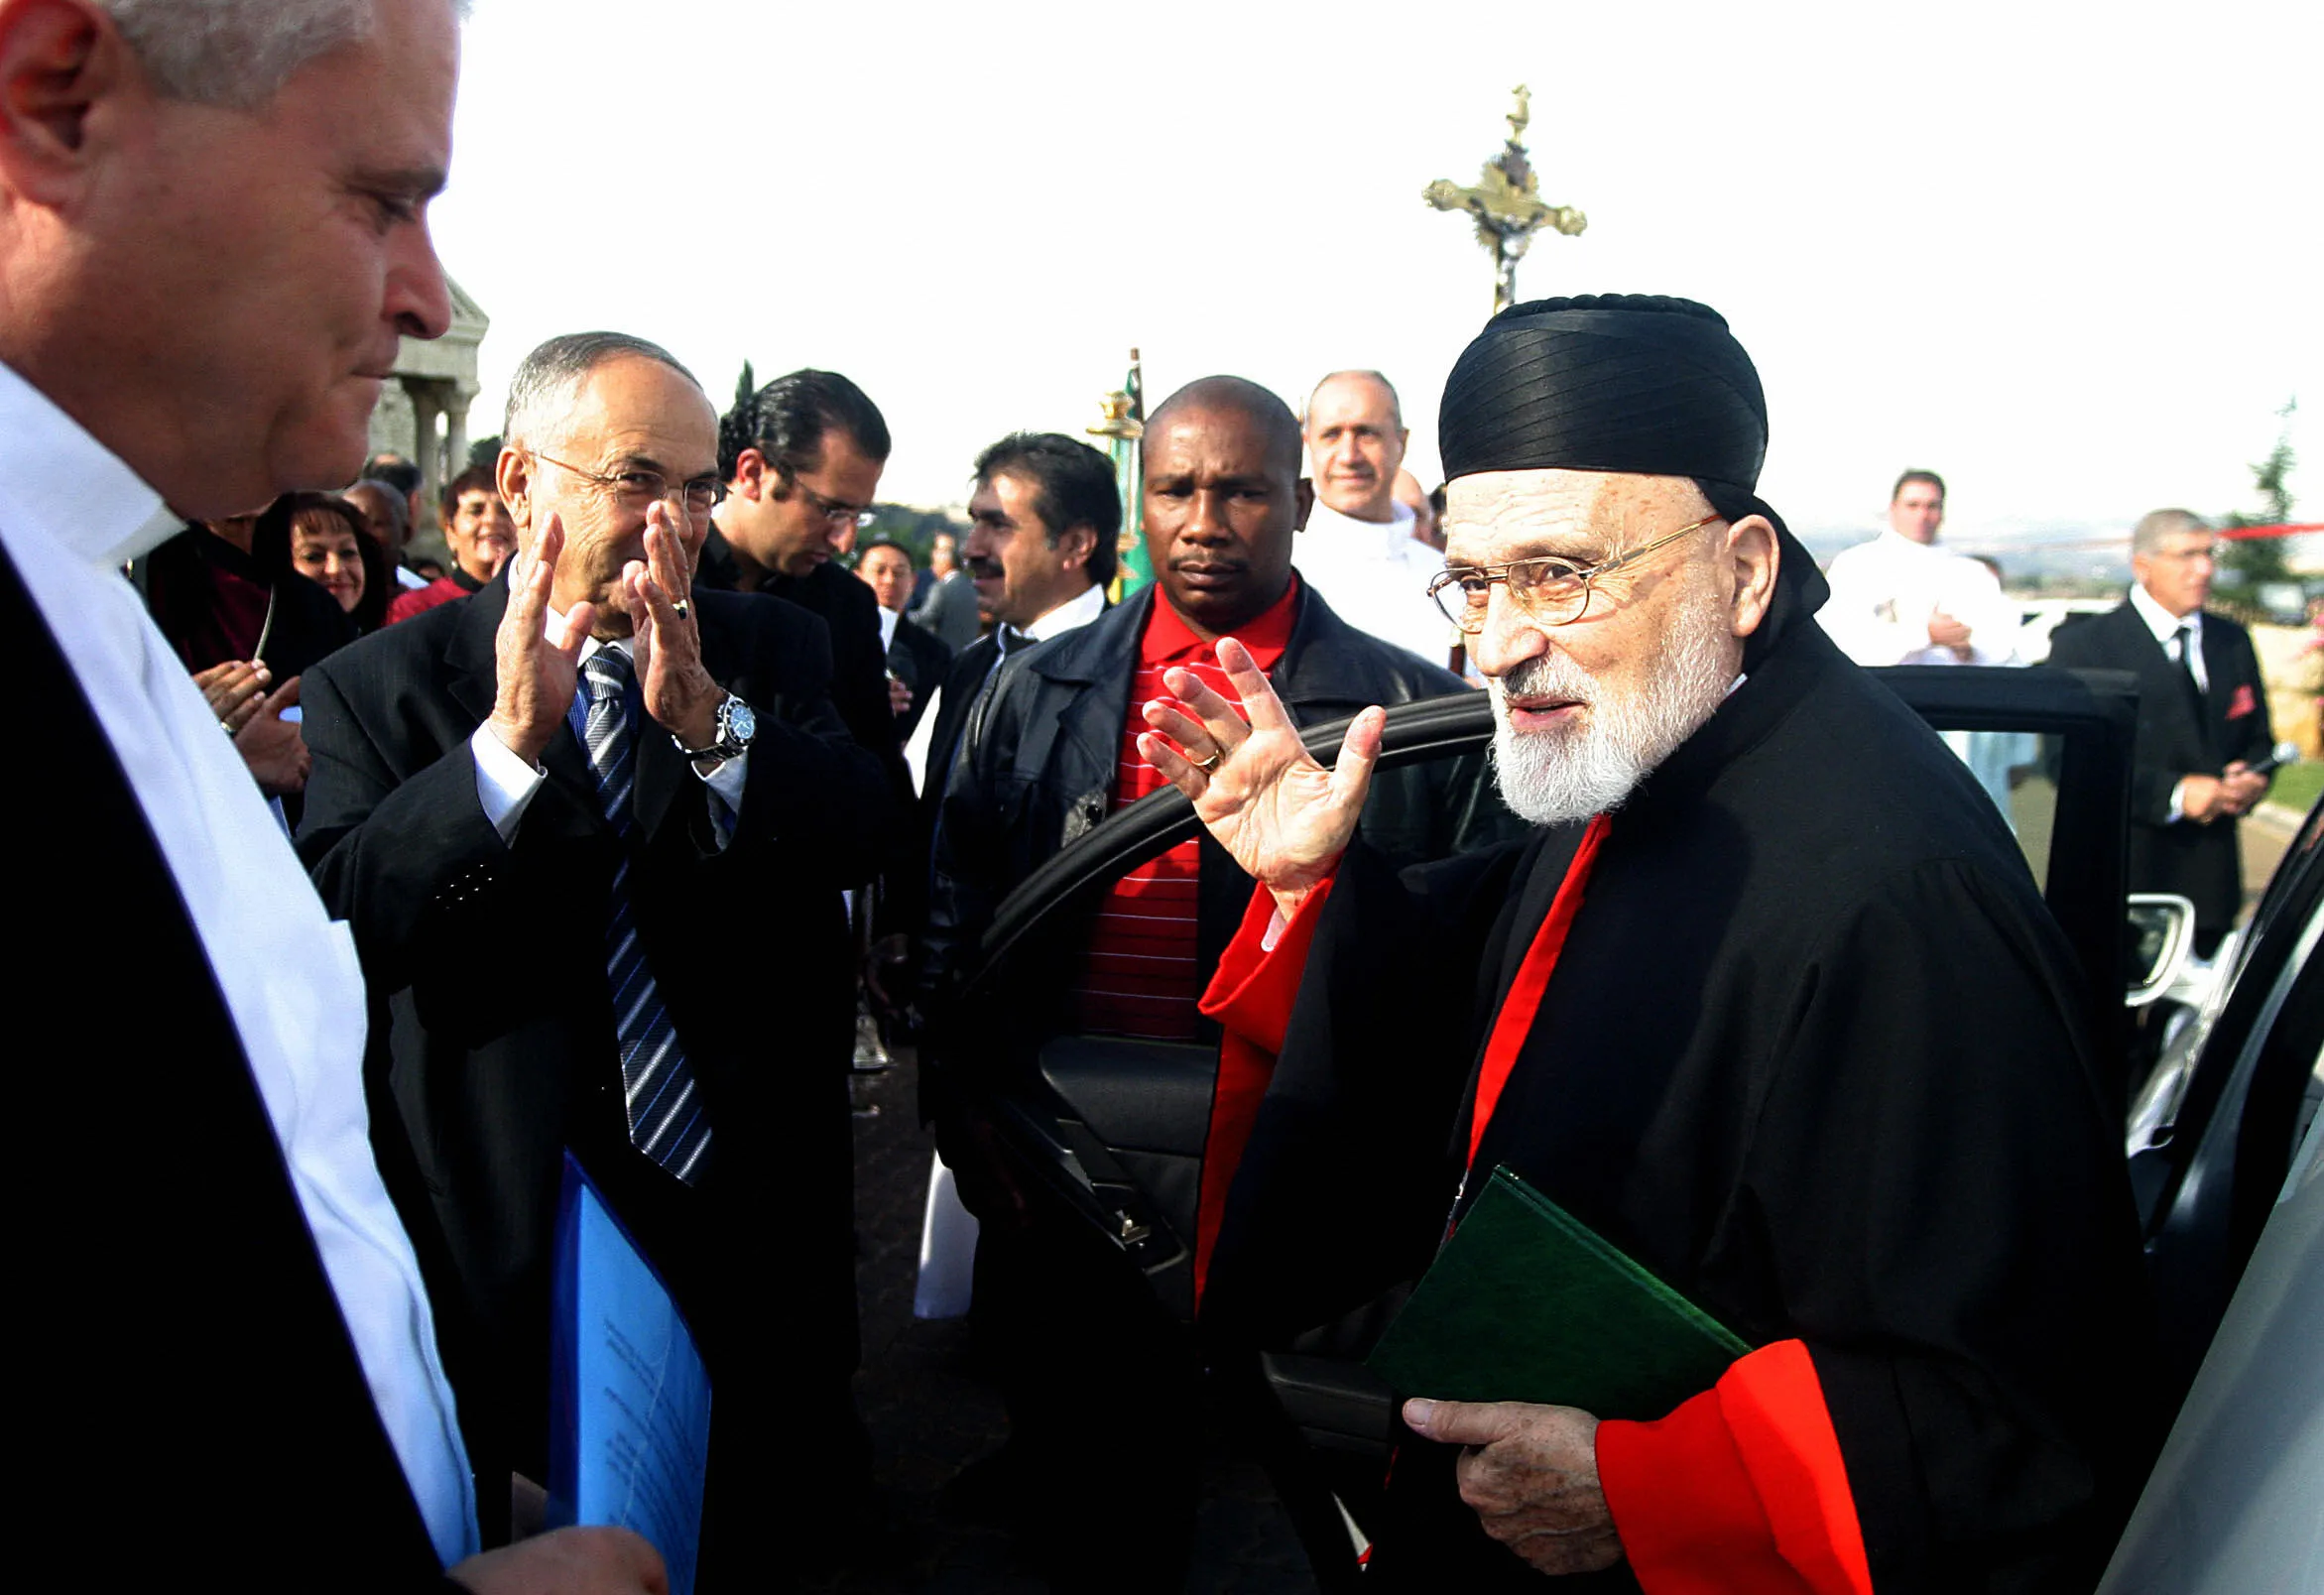 Cardinal Nasrallah Boutros Sfeir, Maronite Patriarch, in Johannesburg, South Africa, May 11, 2008?w=200&h=150